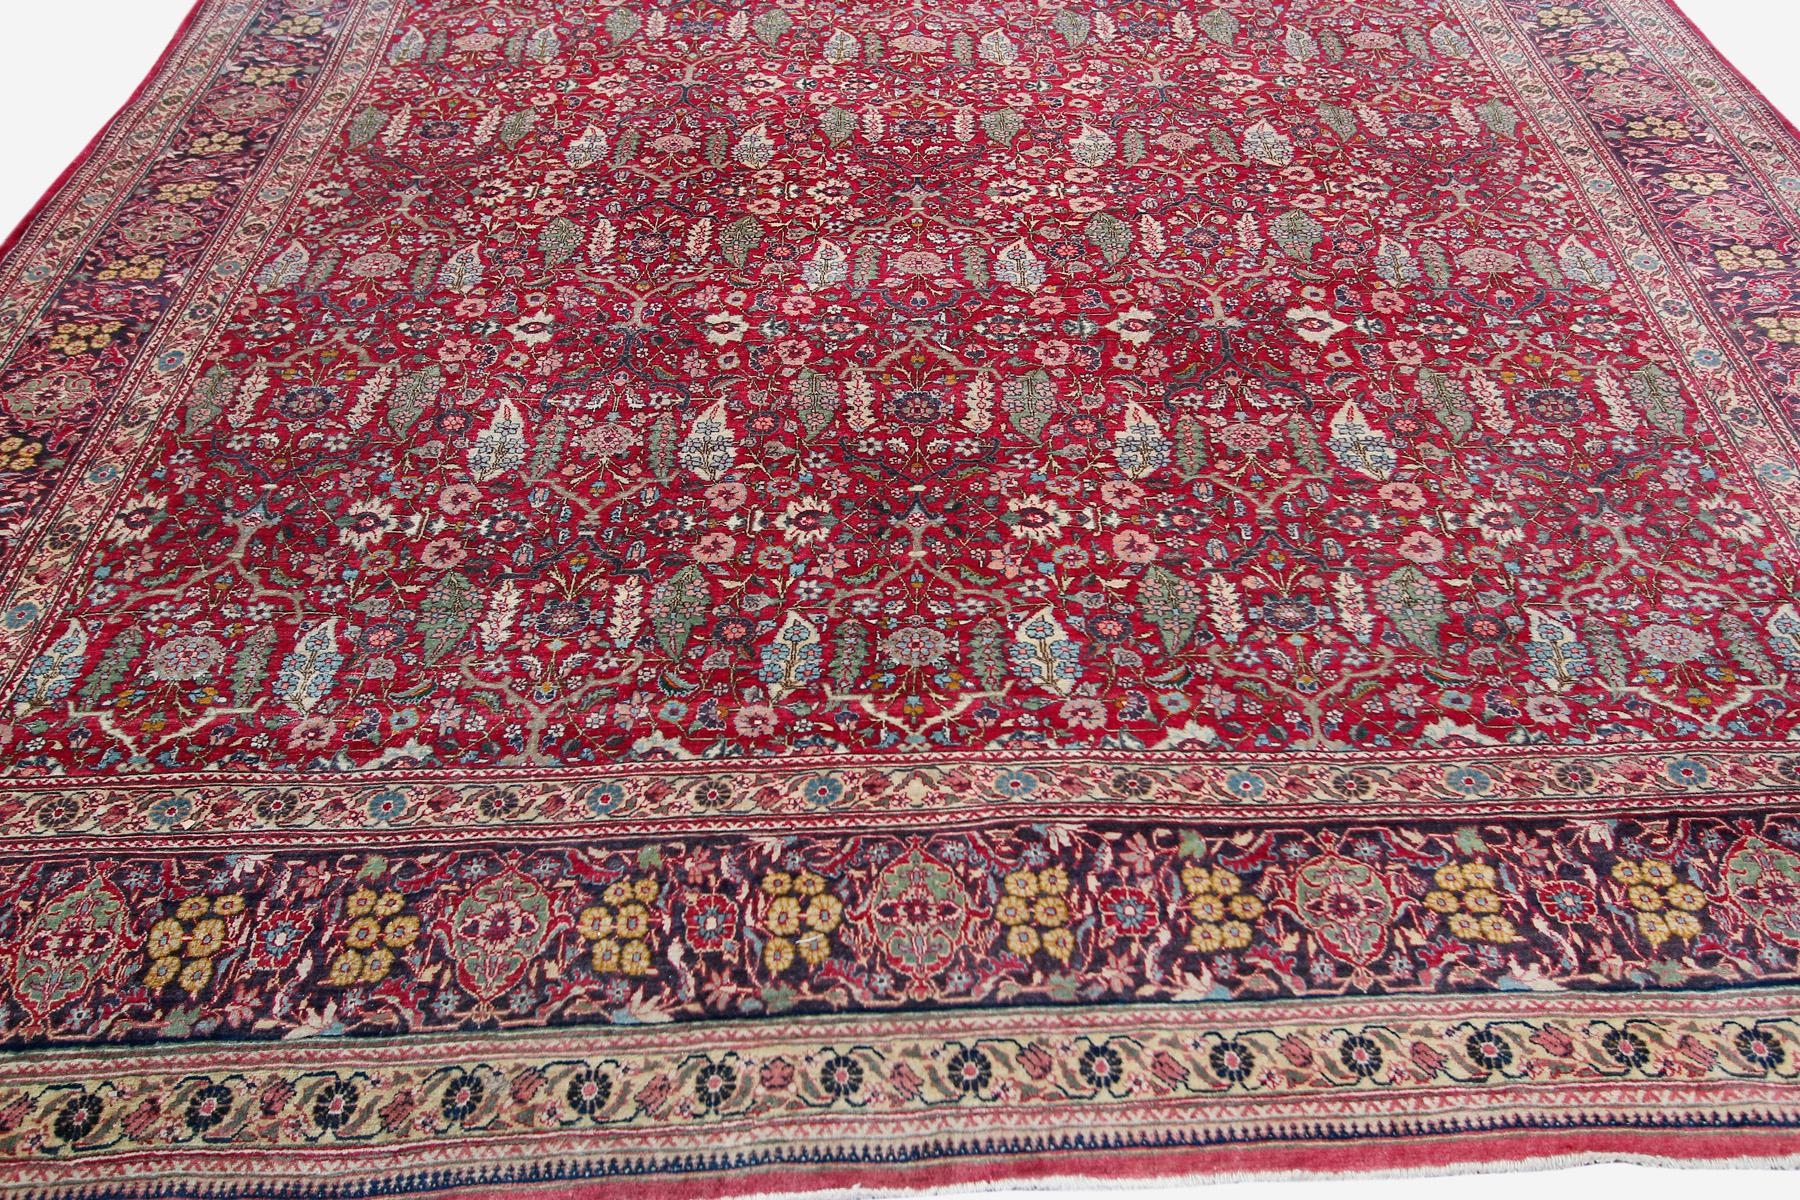 1890 Antique Haji Jalili Rug Antique Persian Rug Geometric Leaf Overall In Good Condition For Sale In New York, NY